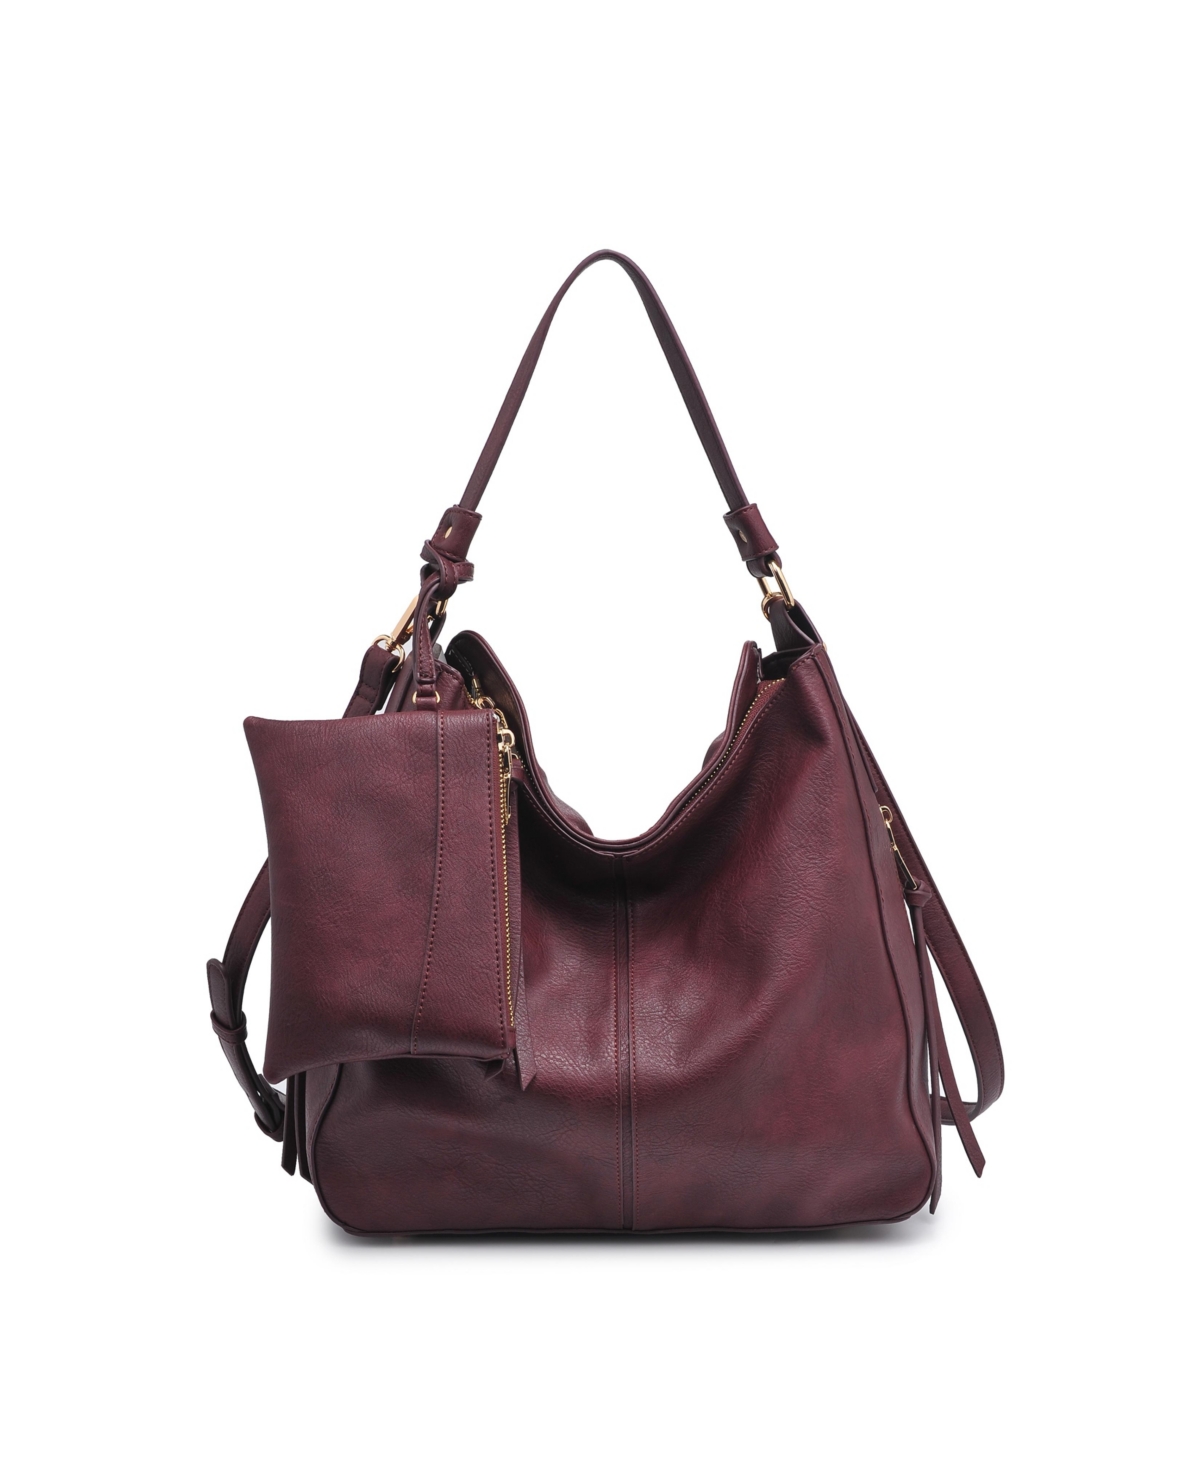 Urban Expressions Wanda Hobo Bag With Pouch In Merlot | ModeSens